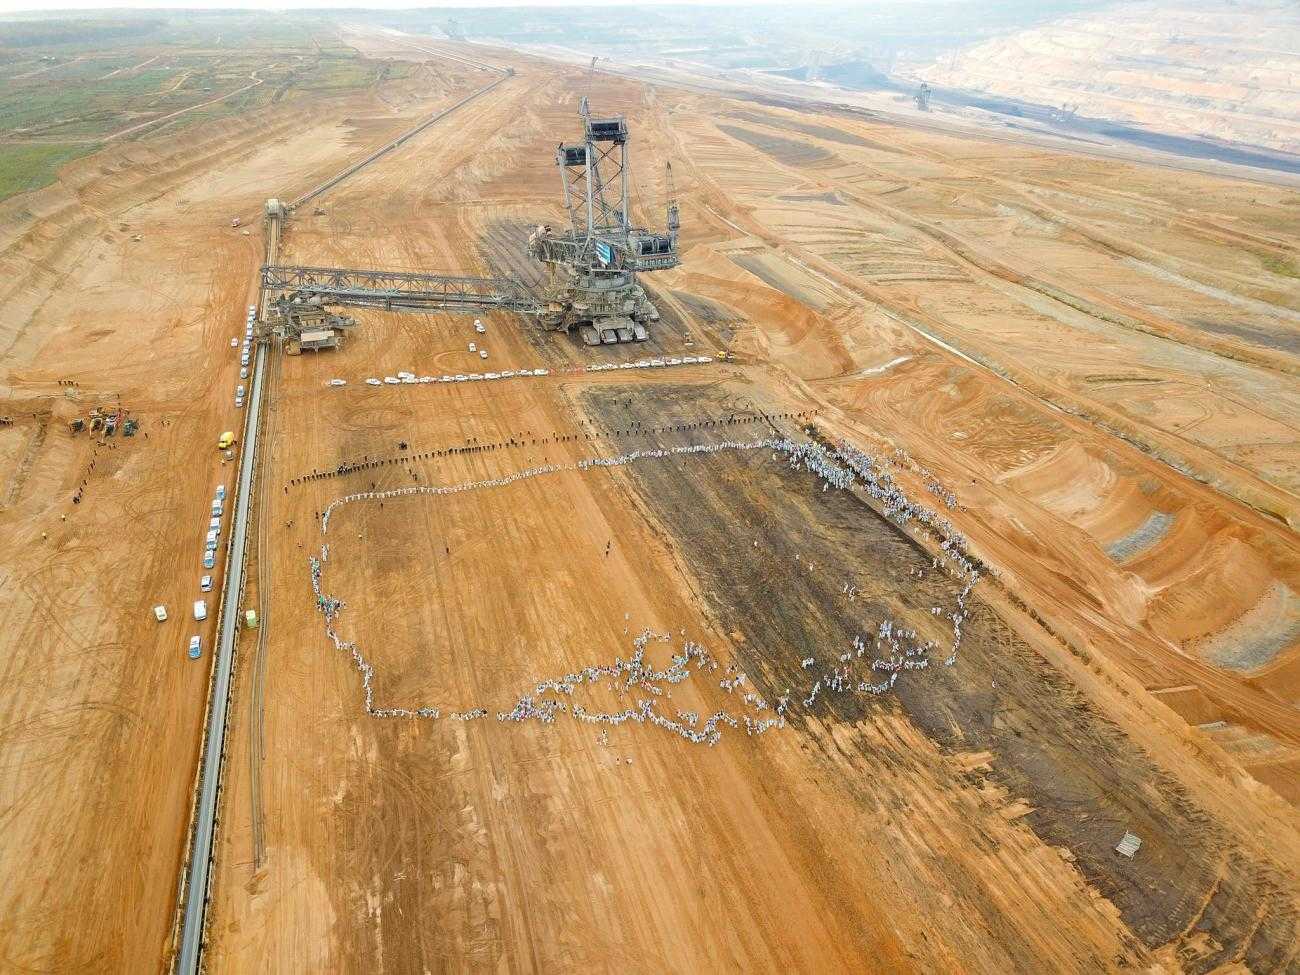 A huge barren landscape with yellow soil. In the background is a huge mining machine. In the foreground but still tiny are hundreds of people dressed in white, forming a circle